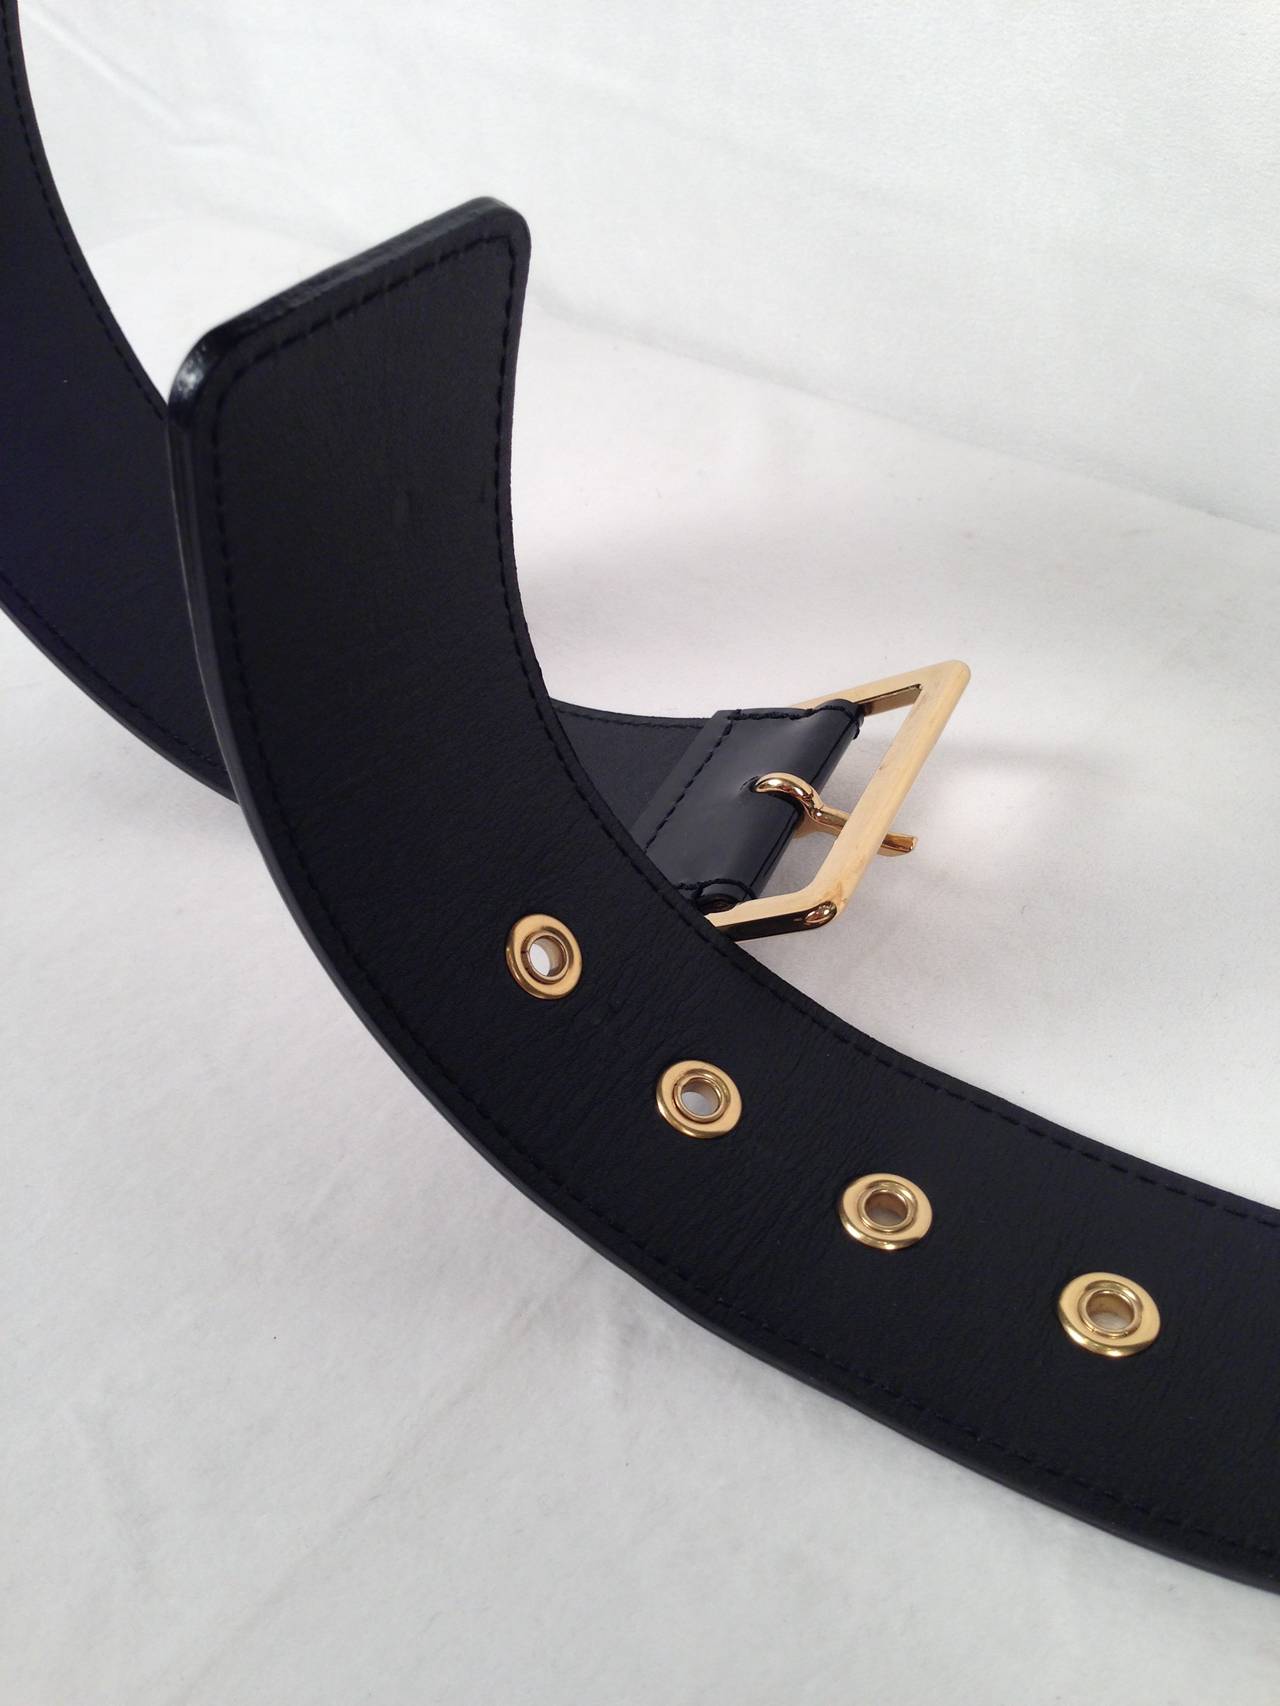 Louis Vuitton Black Patent Leather Belt In Excellent Condition For Sale In Palm Beach, FL